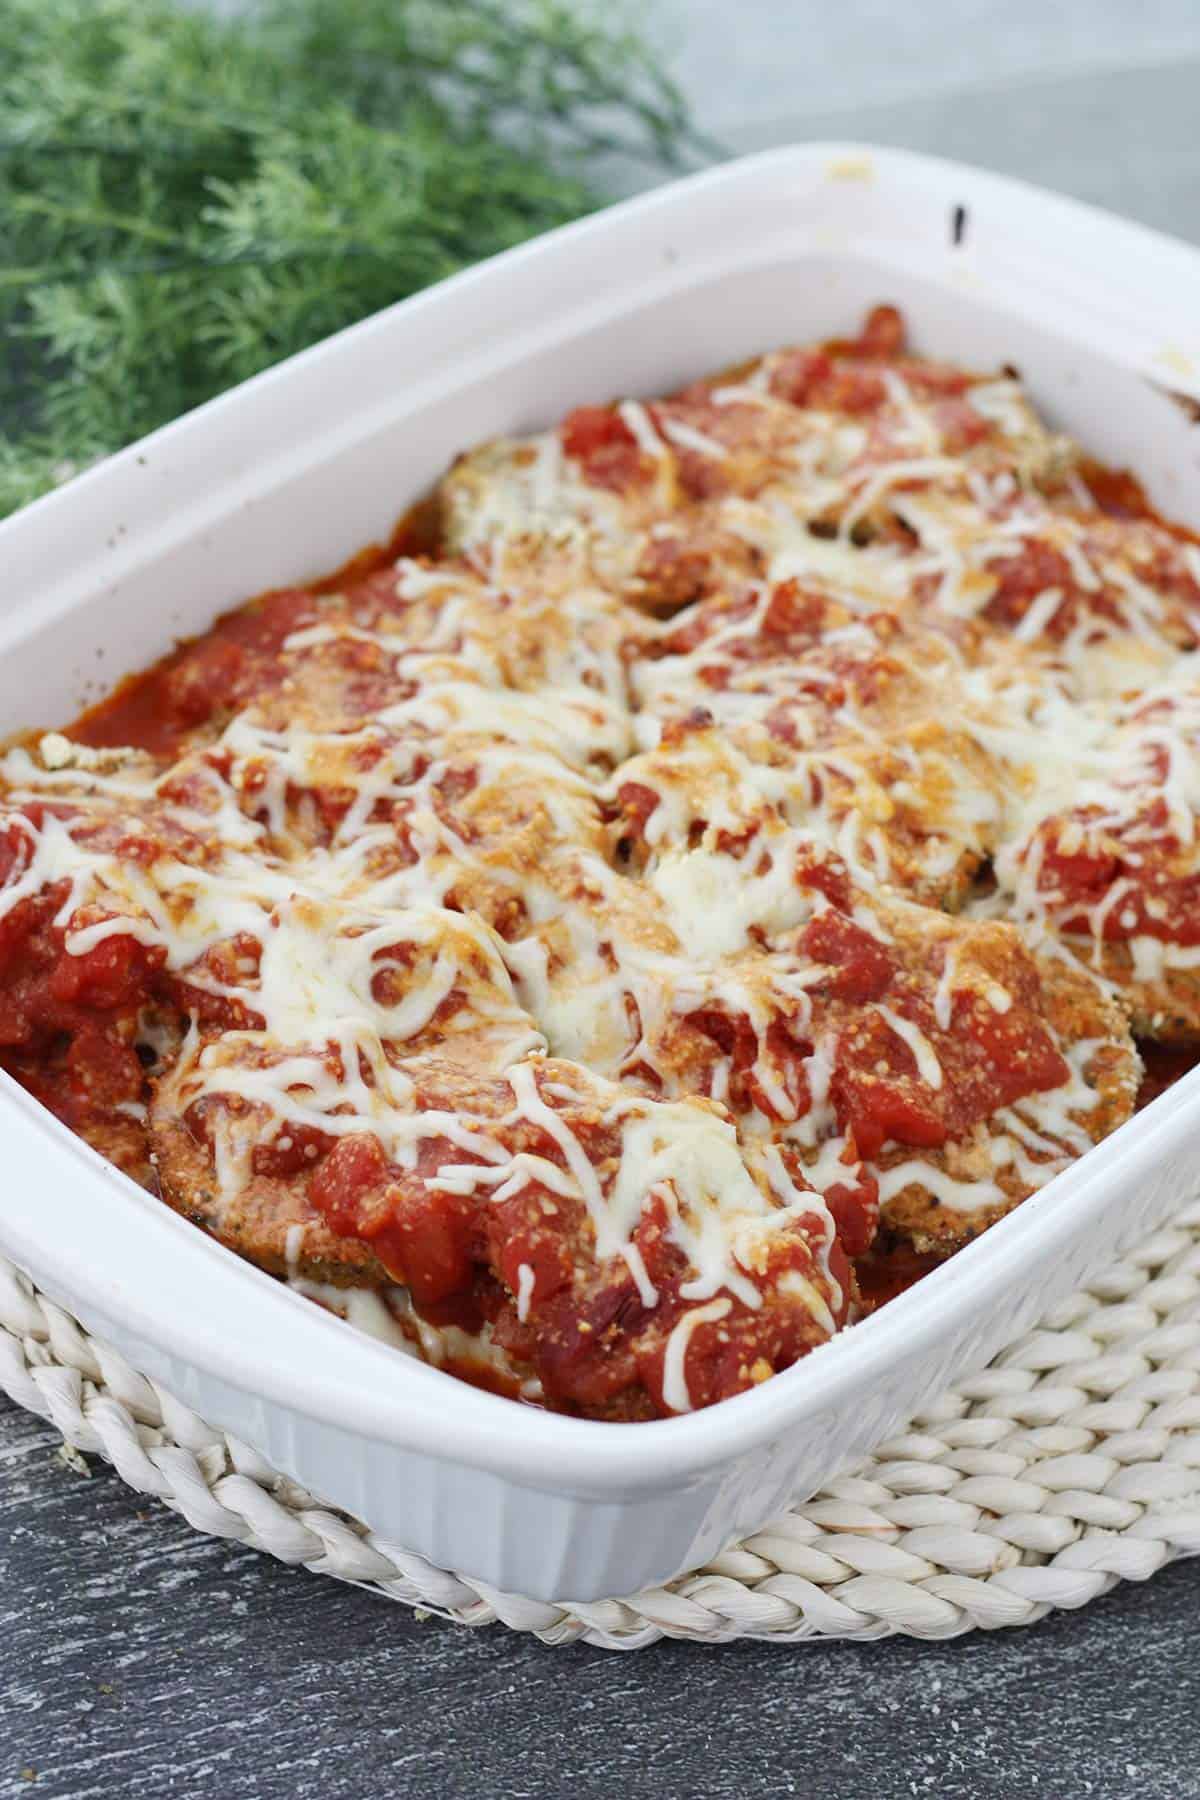 Baked Eggplant Parmesan in a white baking dish.